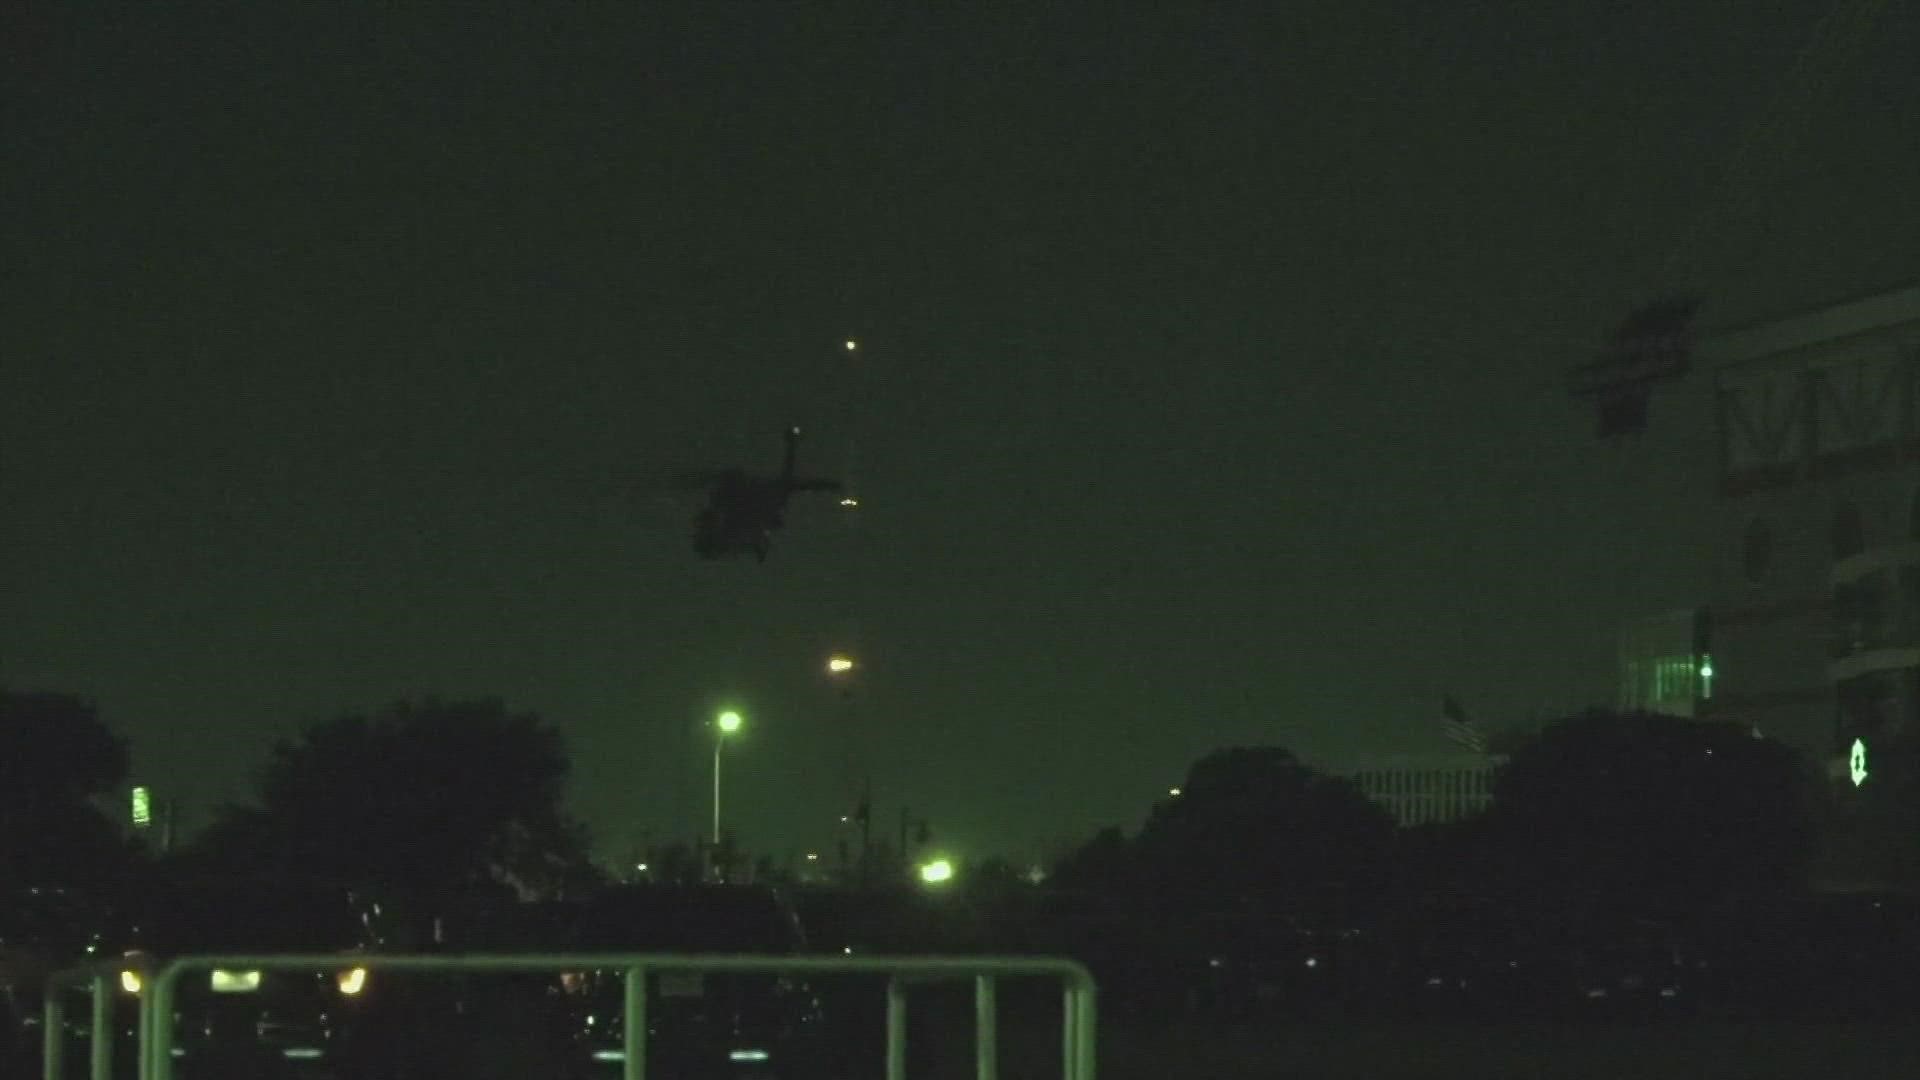 The training exercises are happening at night, and include low-flying helicopters, simulated gunfire, and controlled explosions. Here's what the city had to say.